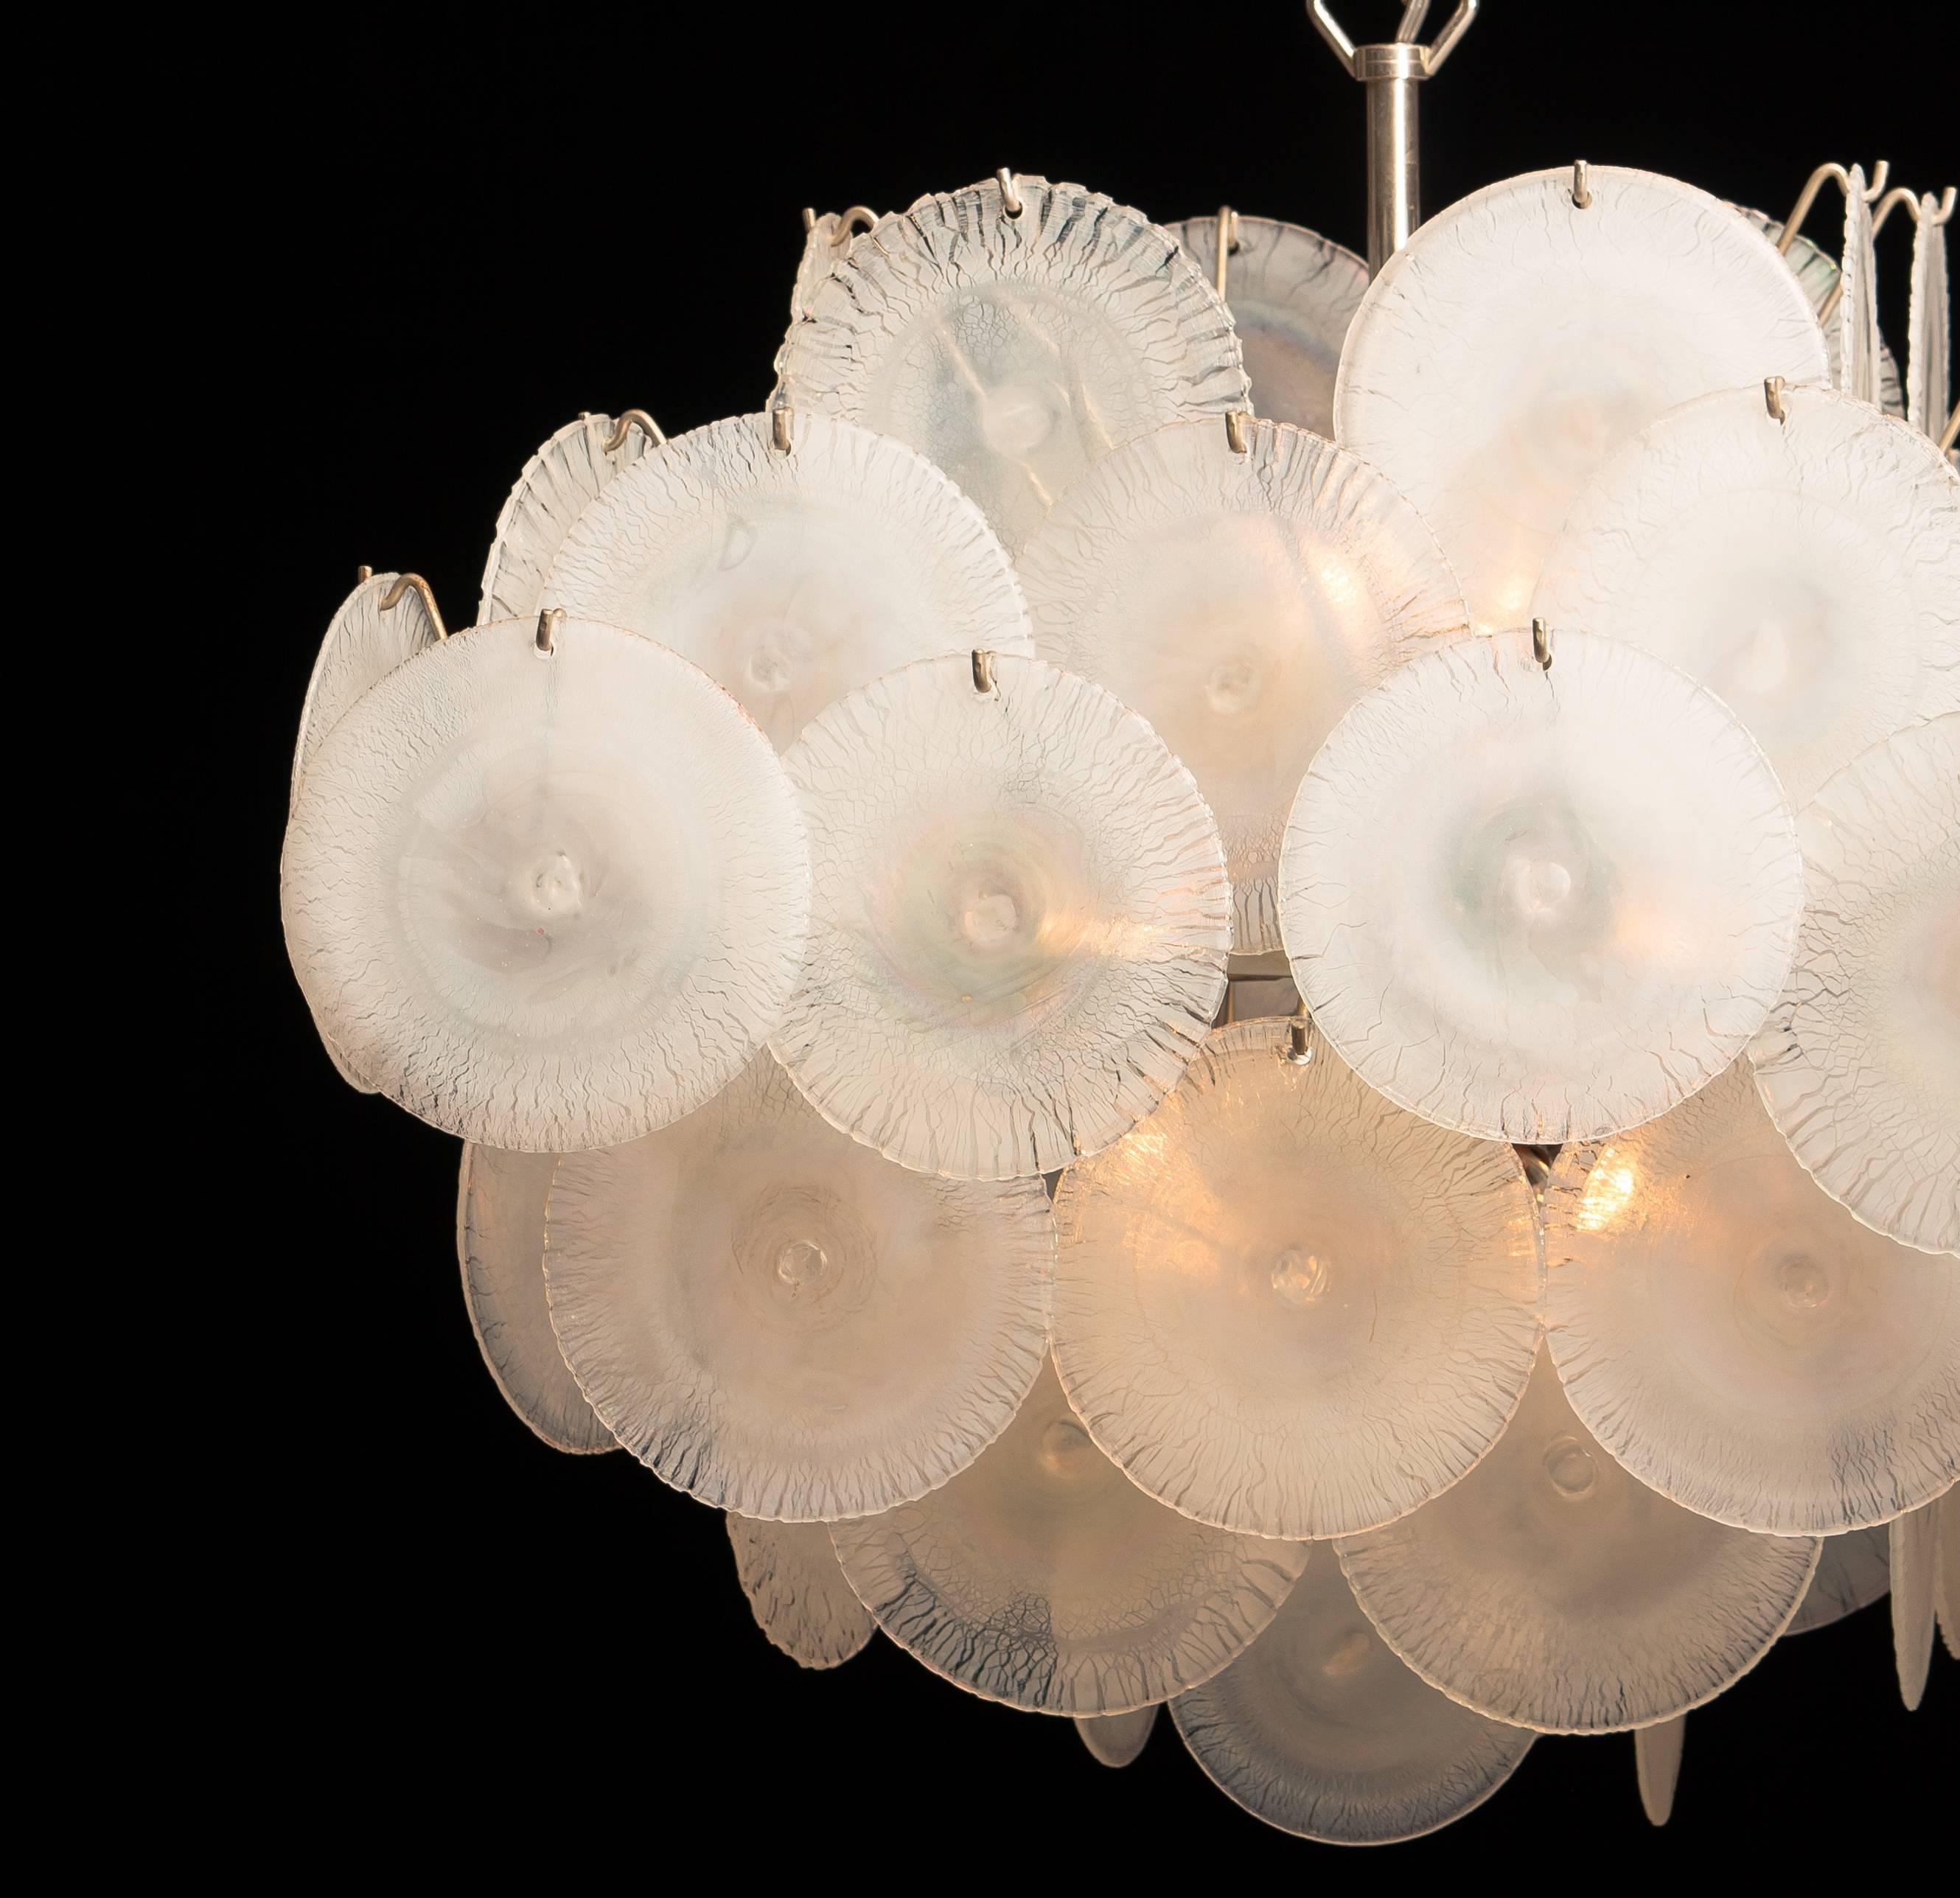 Mid-20th Century Gino Vistosi Chandelier with White or Pearl Murano Crystal Discs